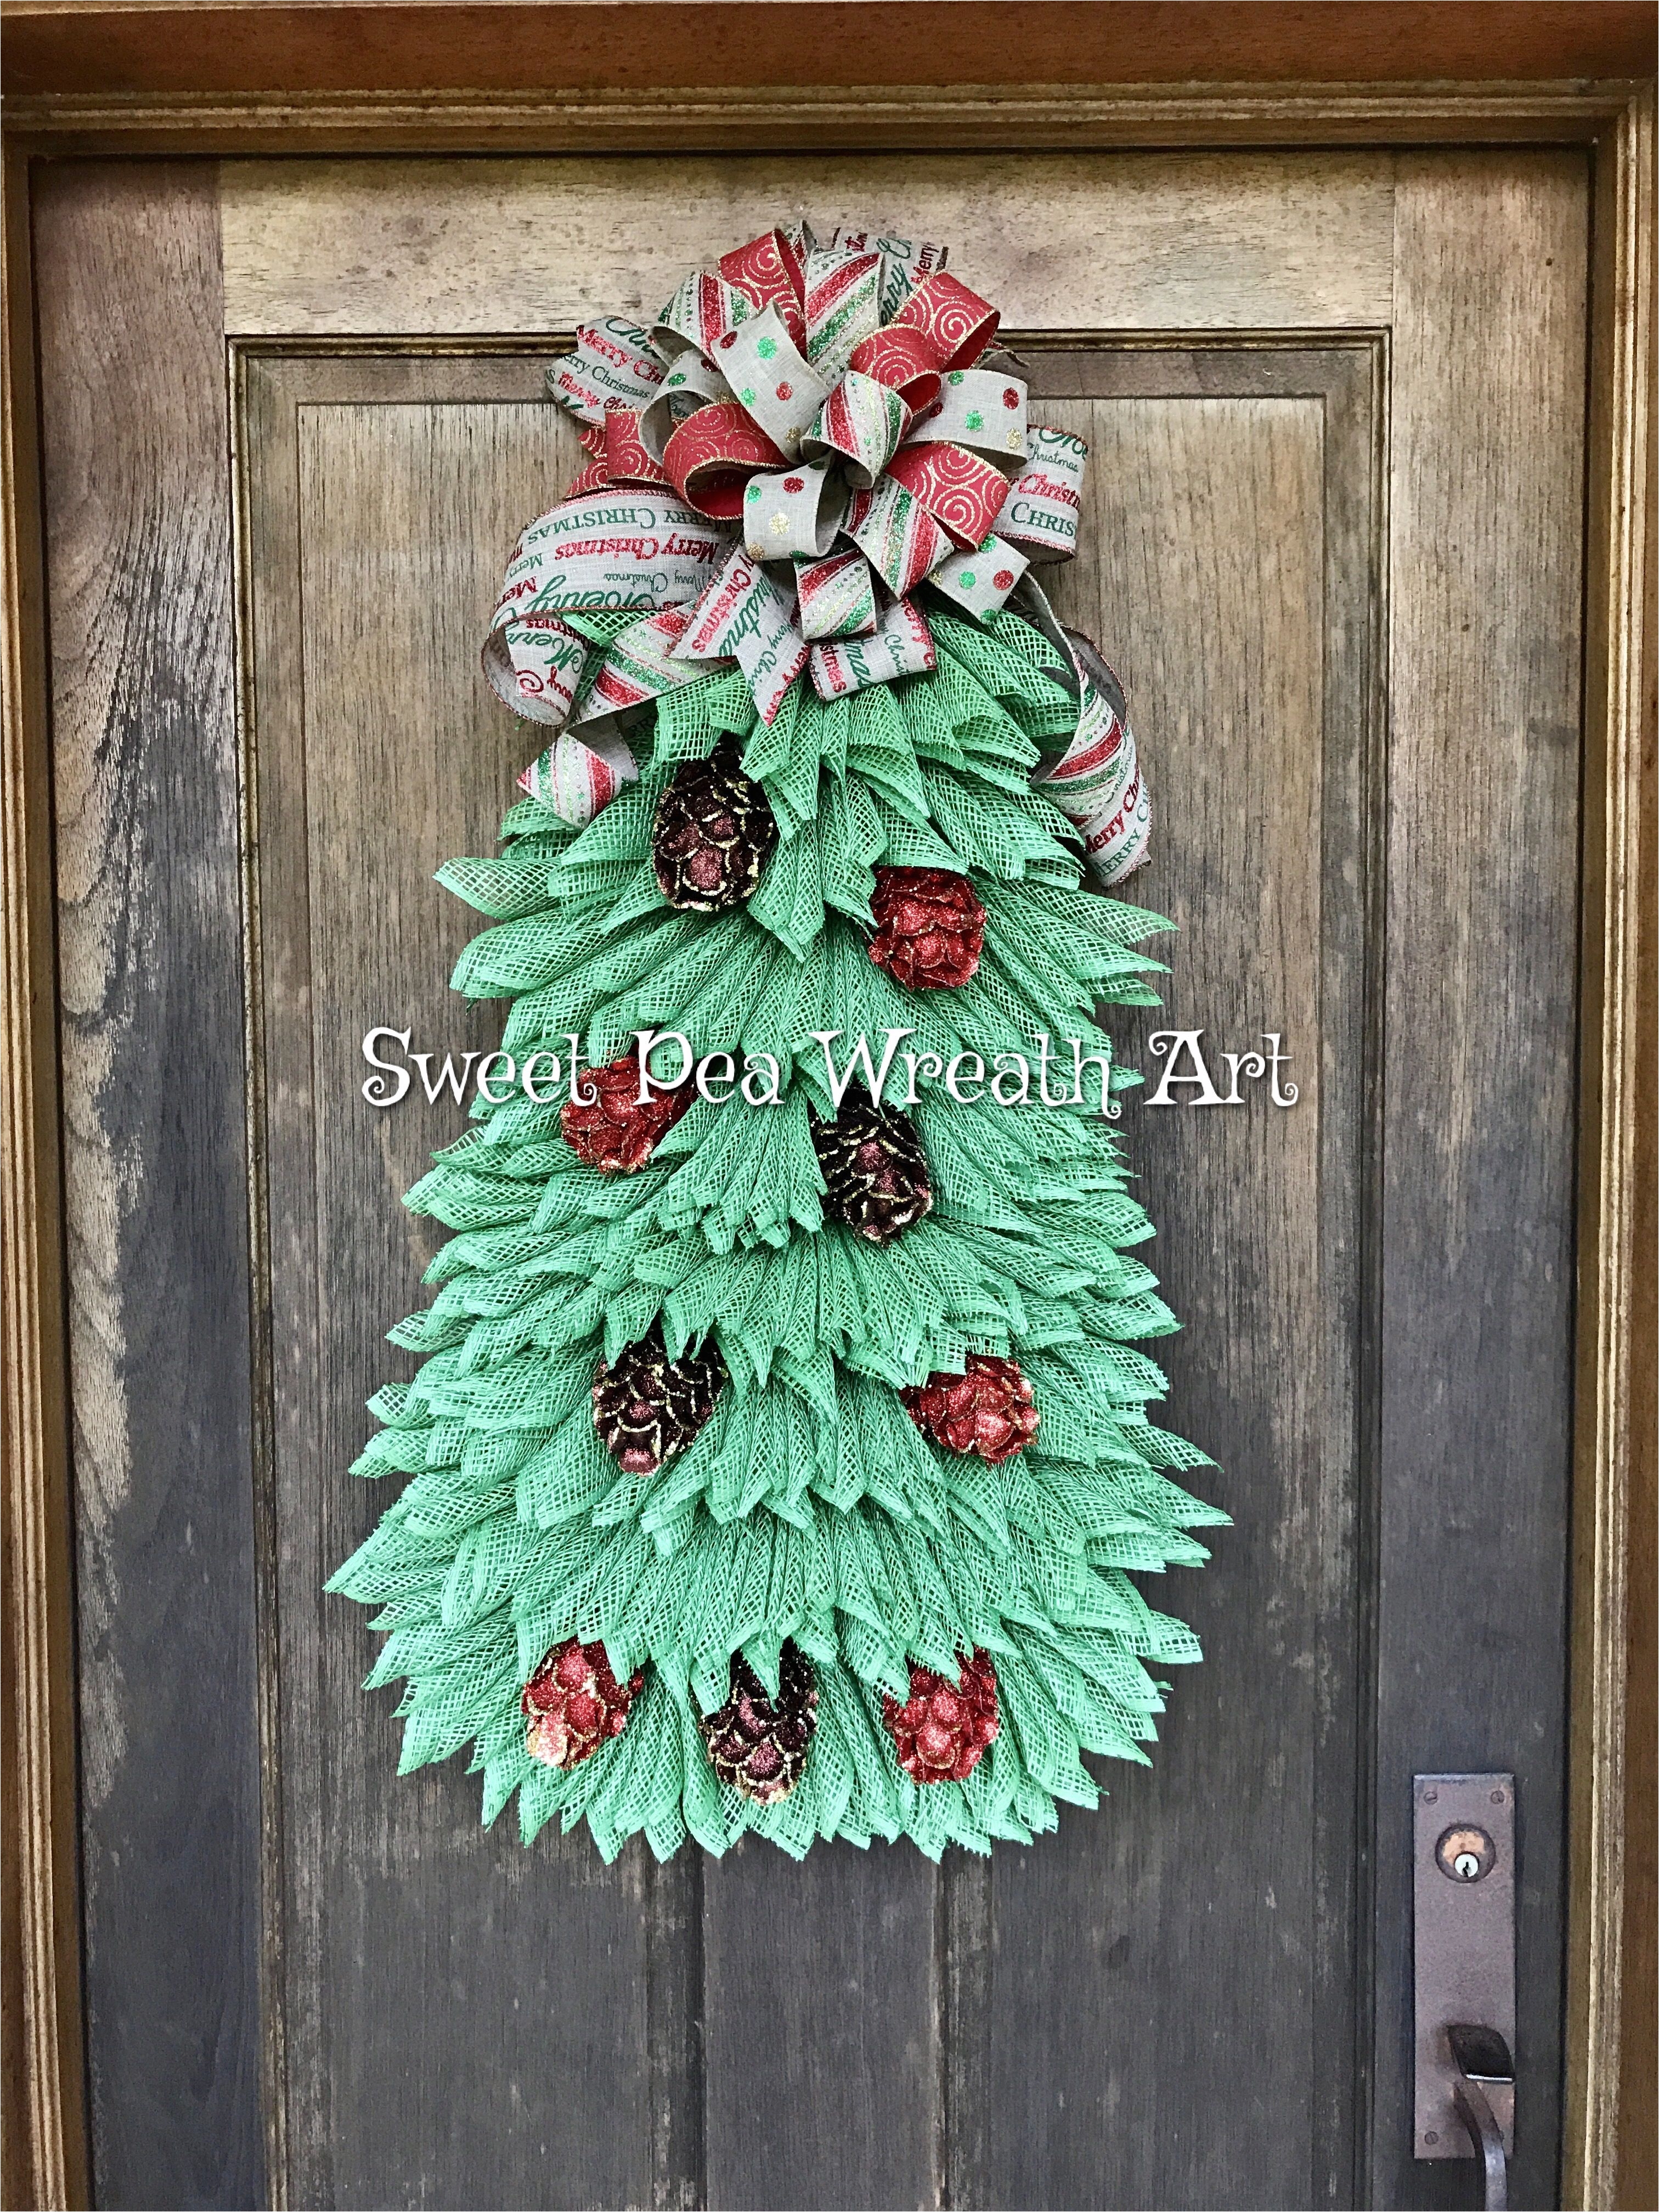 Decorative Pine Trees Christmas Tree Wreath with Realistic Branches and Glittered Pine